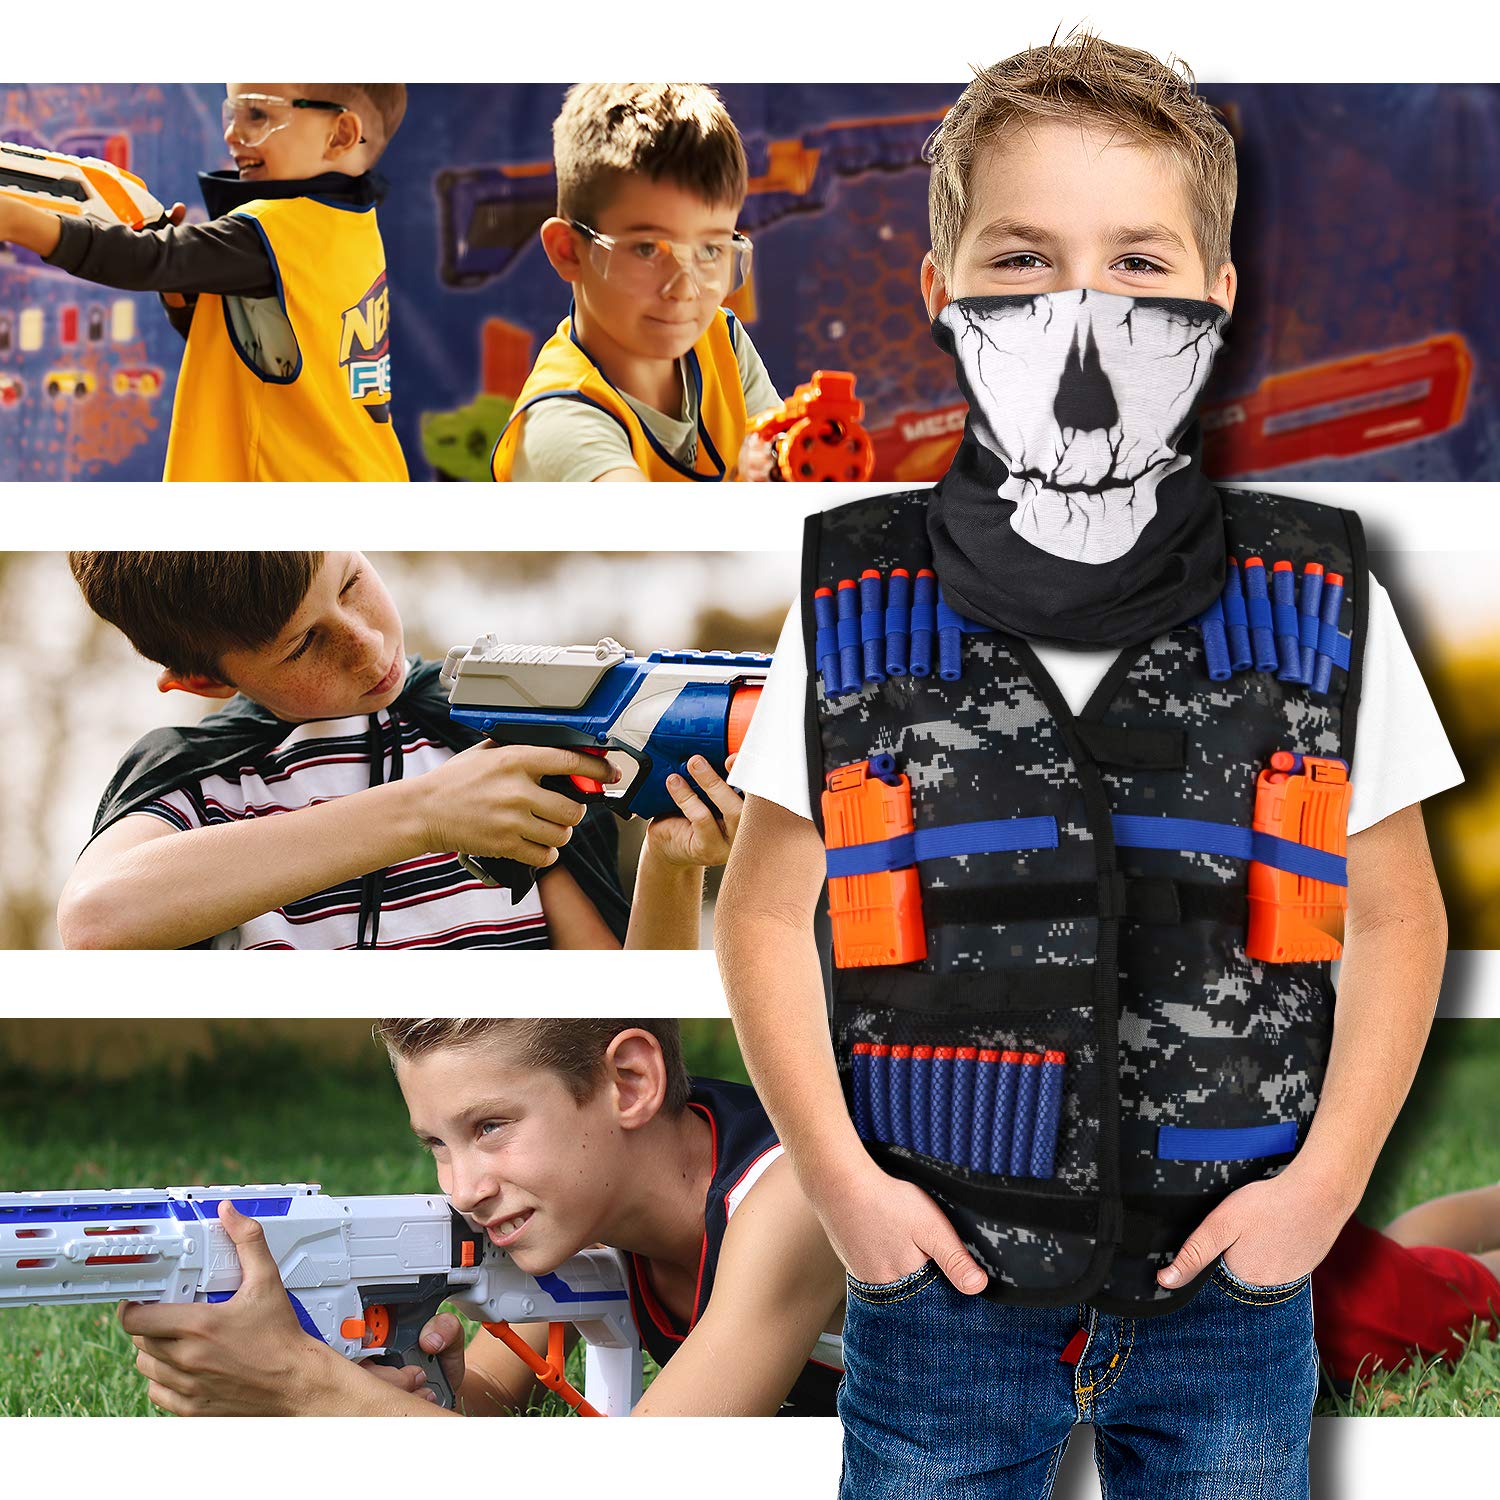 Kids Tactical Vest Kit for Nerf Guns Series with Refill Darts,Dart Pouch, Reload Clips, Tactical Mask, Wrist Band and Protective Glasses,Nerf Vest Toys for 4 5 6 7 8 9 10 11 12 Year Boys(2 Pack)